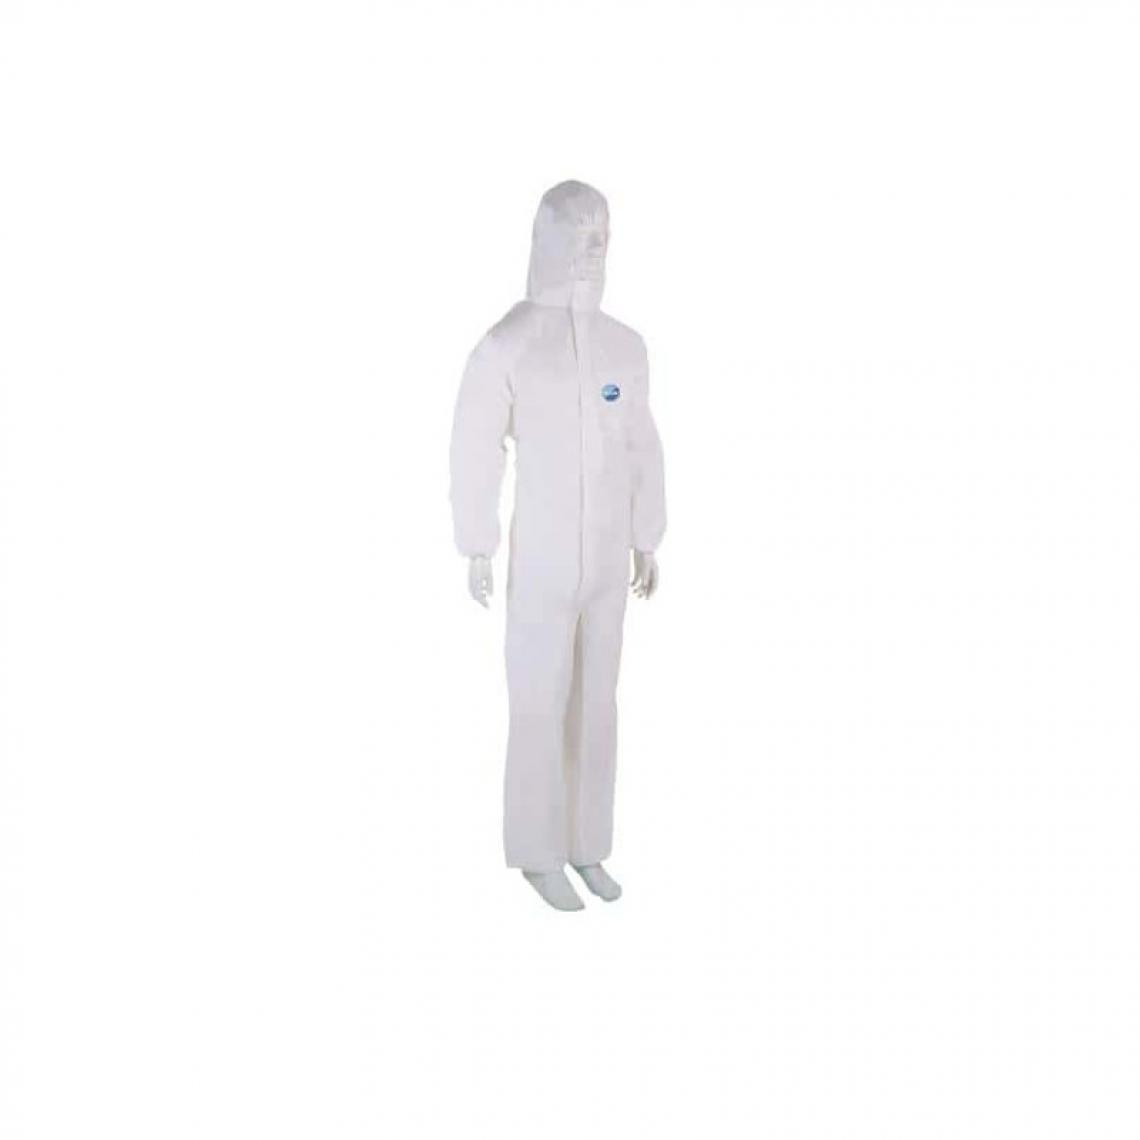 Divers Marques - Combinaison jetable Tyvek Classic Xpert catégorie III taille XL - Protections corps